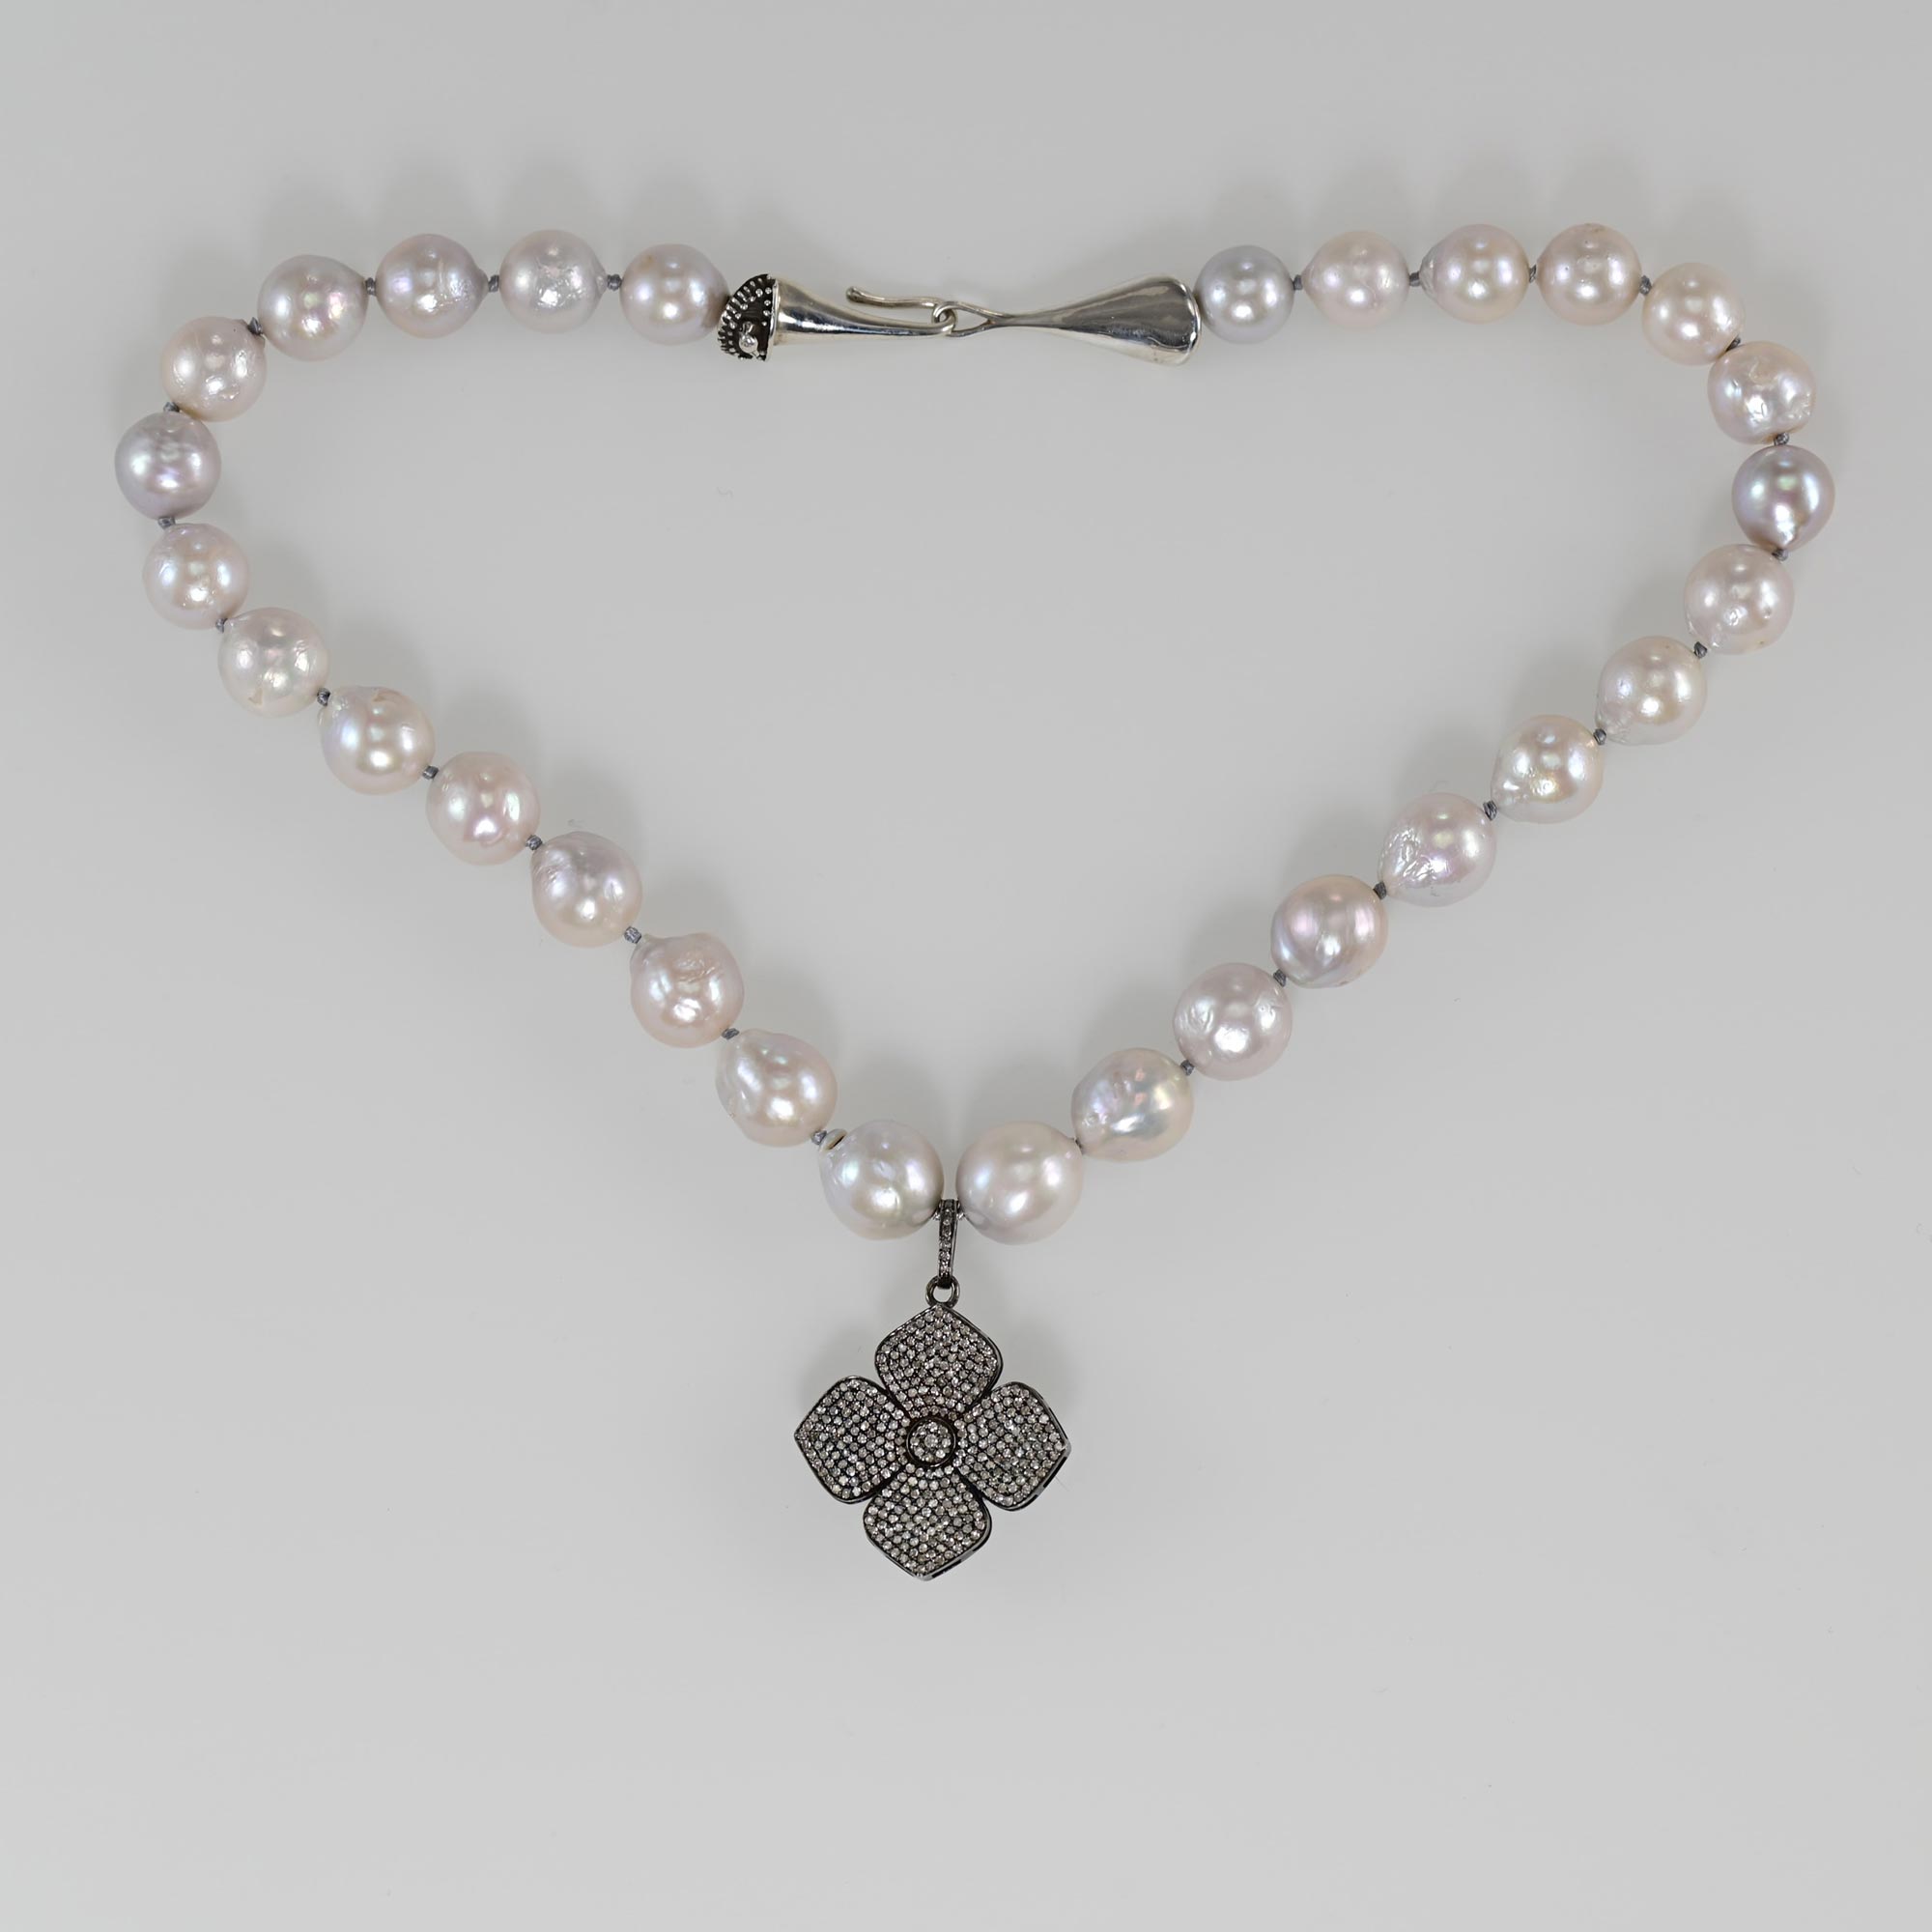 Soft grey baroque Pearls with Diamond and silver floral pendant